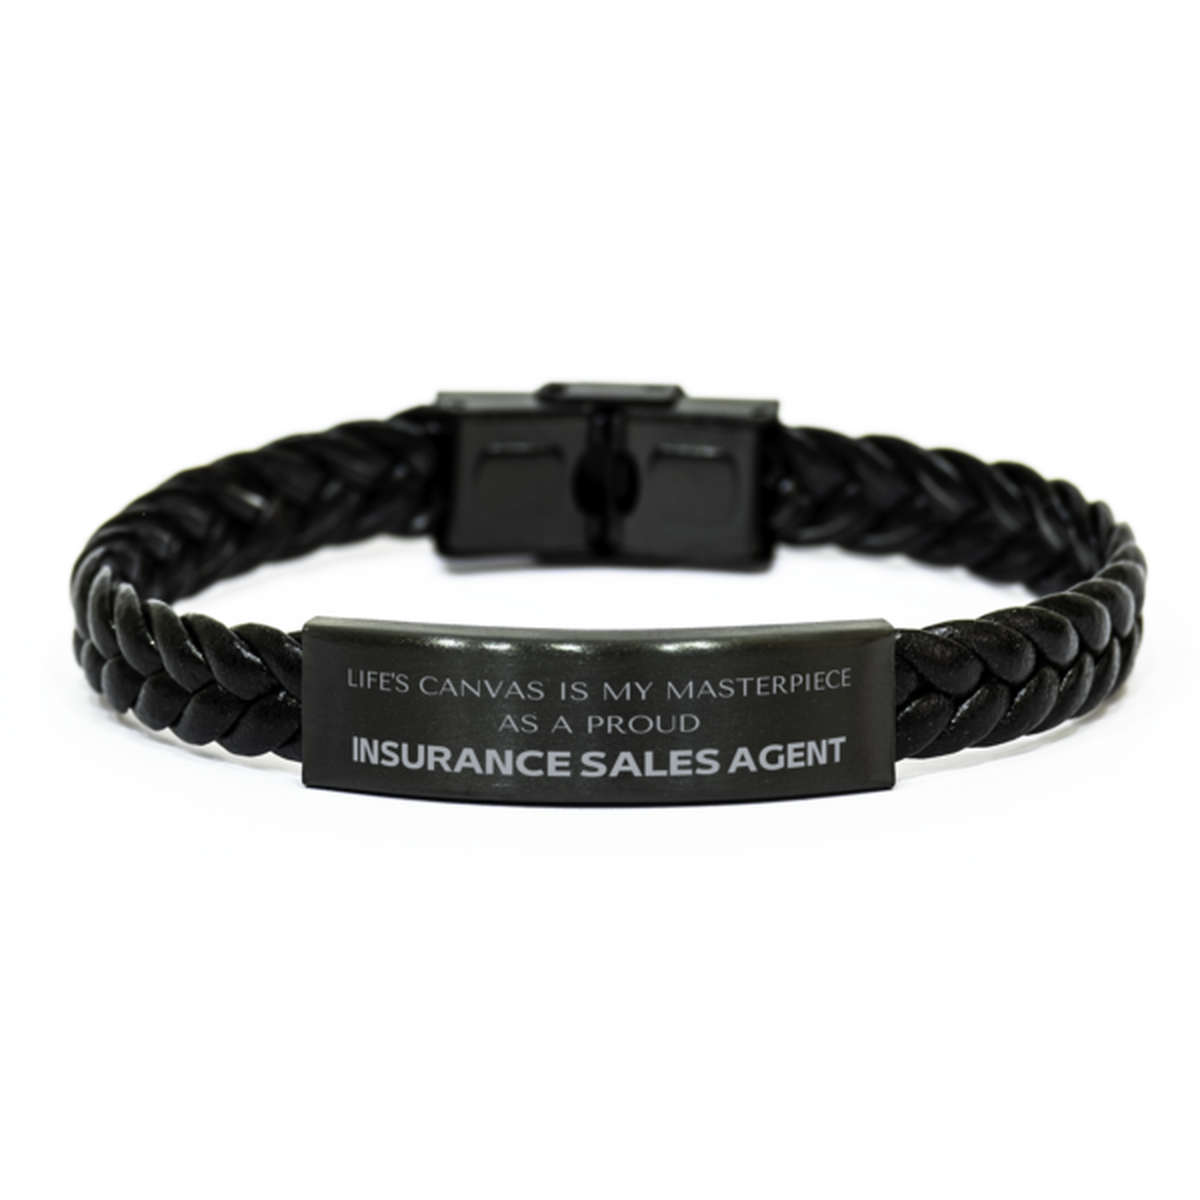 Proud Insurance Sales Agent Gifts, Life's canvas is my masterpiece, Epic Birthday Christmas Unique Braided Leather Bracelet For Insurance Sales Agent, Coworkers, Men, Women, Friends